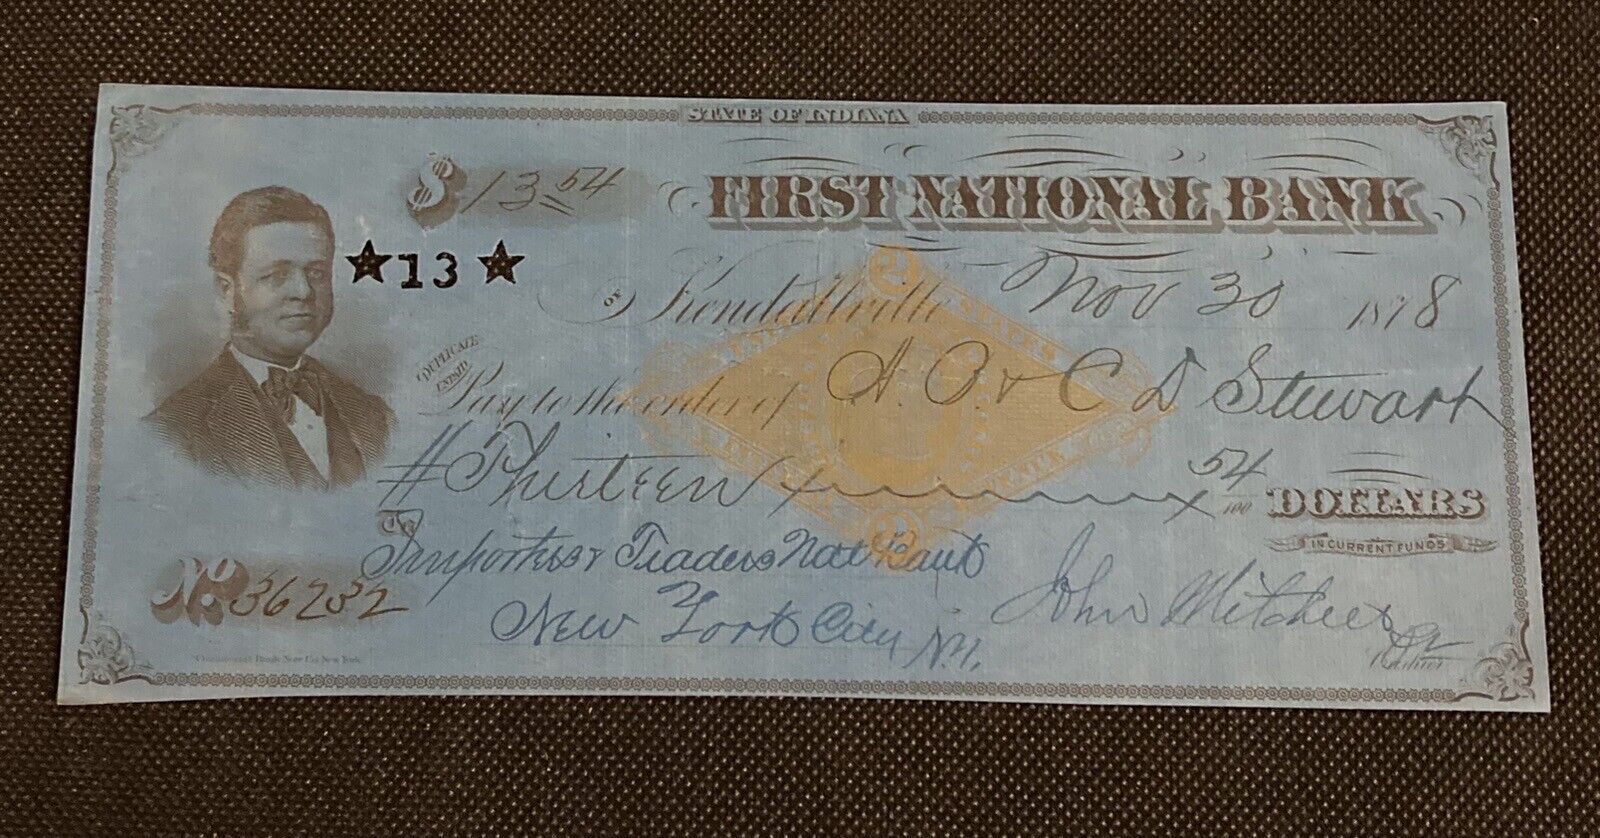 FIRST NATIONAL BANK OF KENDALLVILLE, INDIANA 1878 USED CHECK ON BLUE PAPER